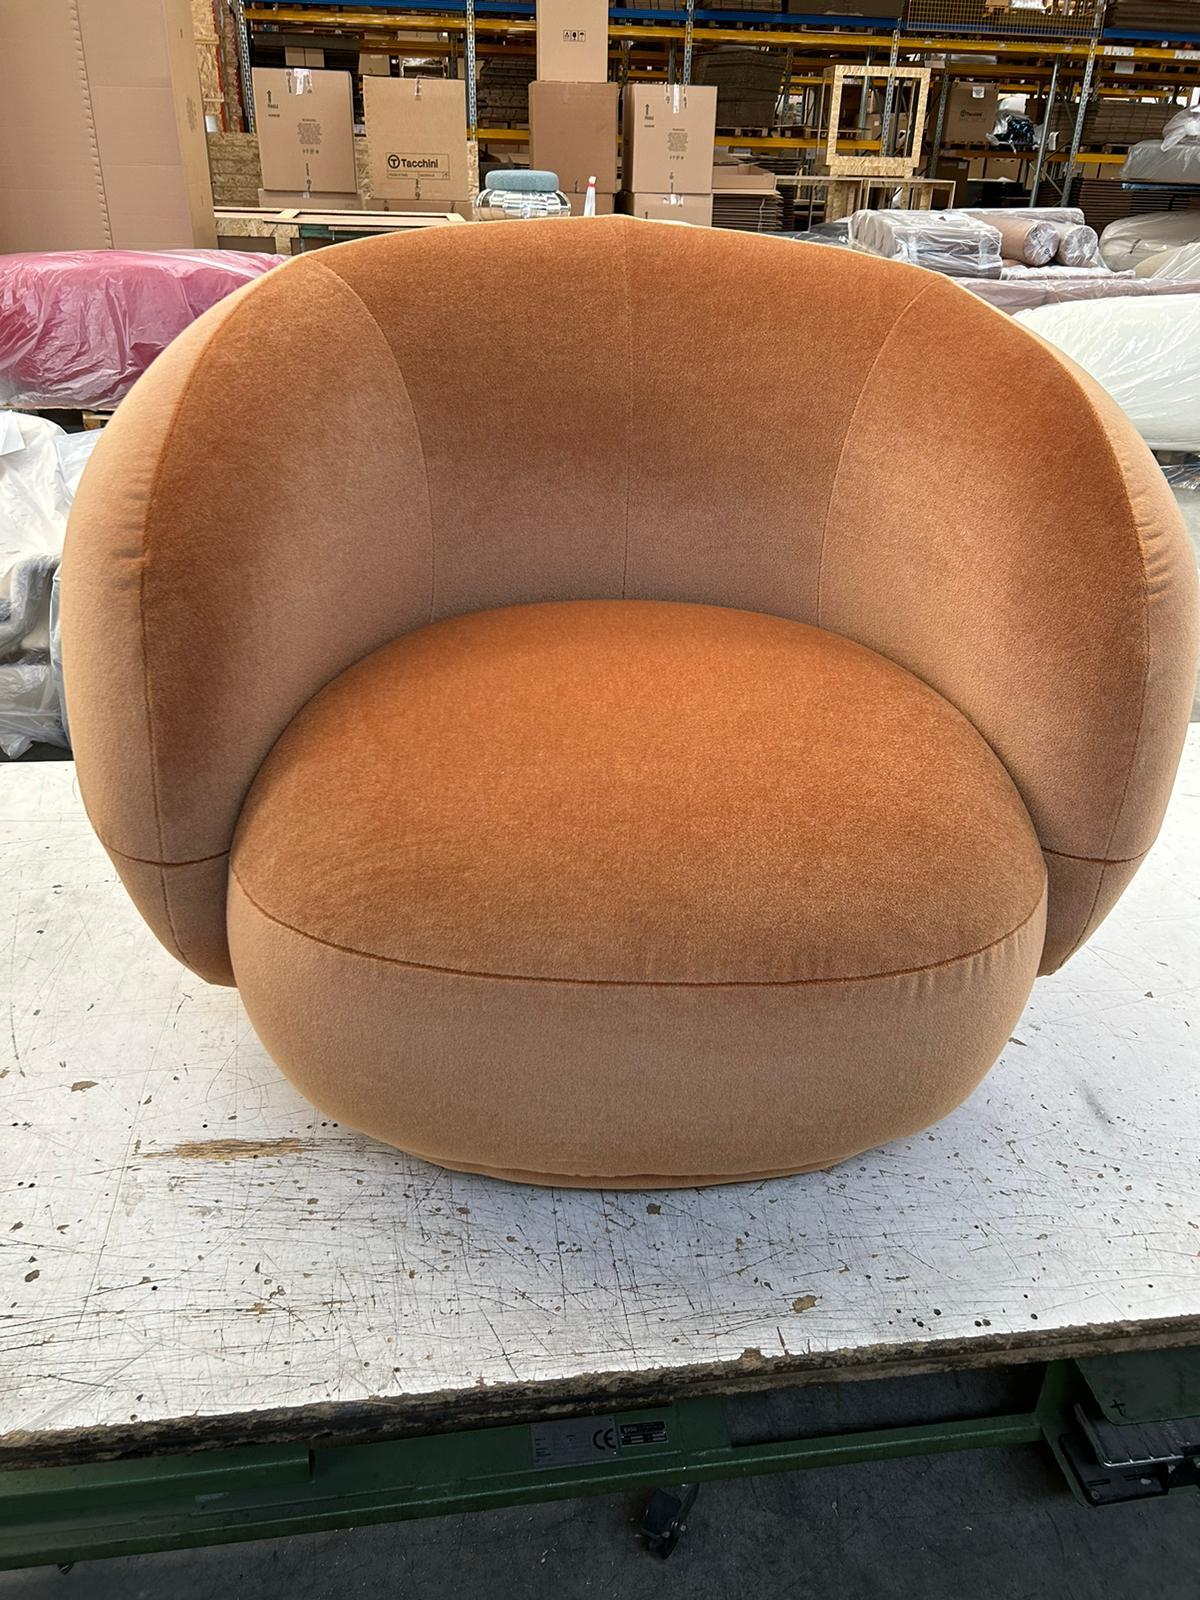 CJULS102MIR11
CAT. V MIRABILIS 11
SOFT VERSION
WITH CAL 117 FR FOAM
Soft, enveloping shapes characterize this family of upholstered pieces. Julep is influenced by the 1950s Avant Garde movement, drawing upon its simplicity and grandeur, refined by a